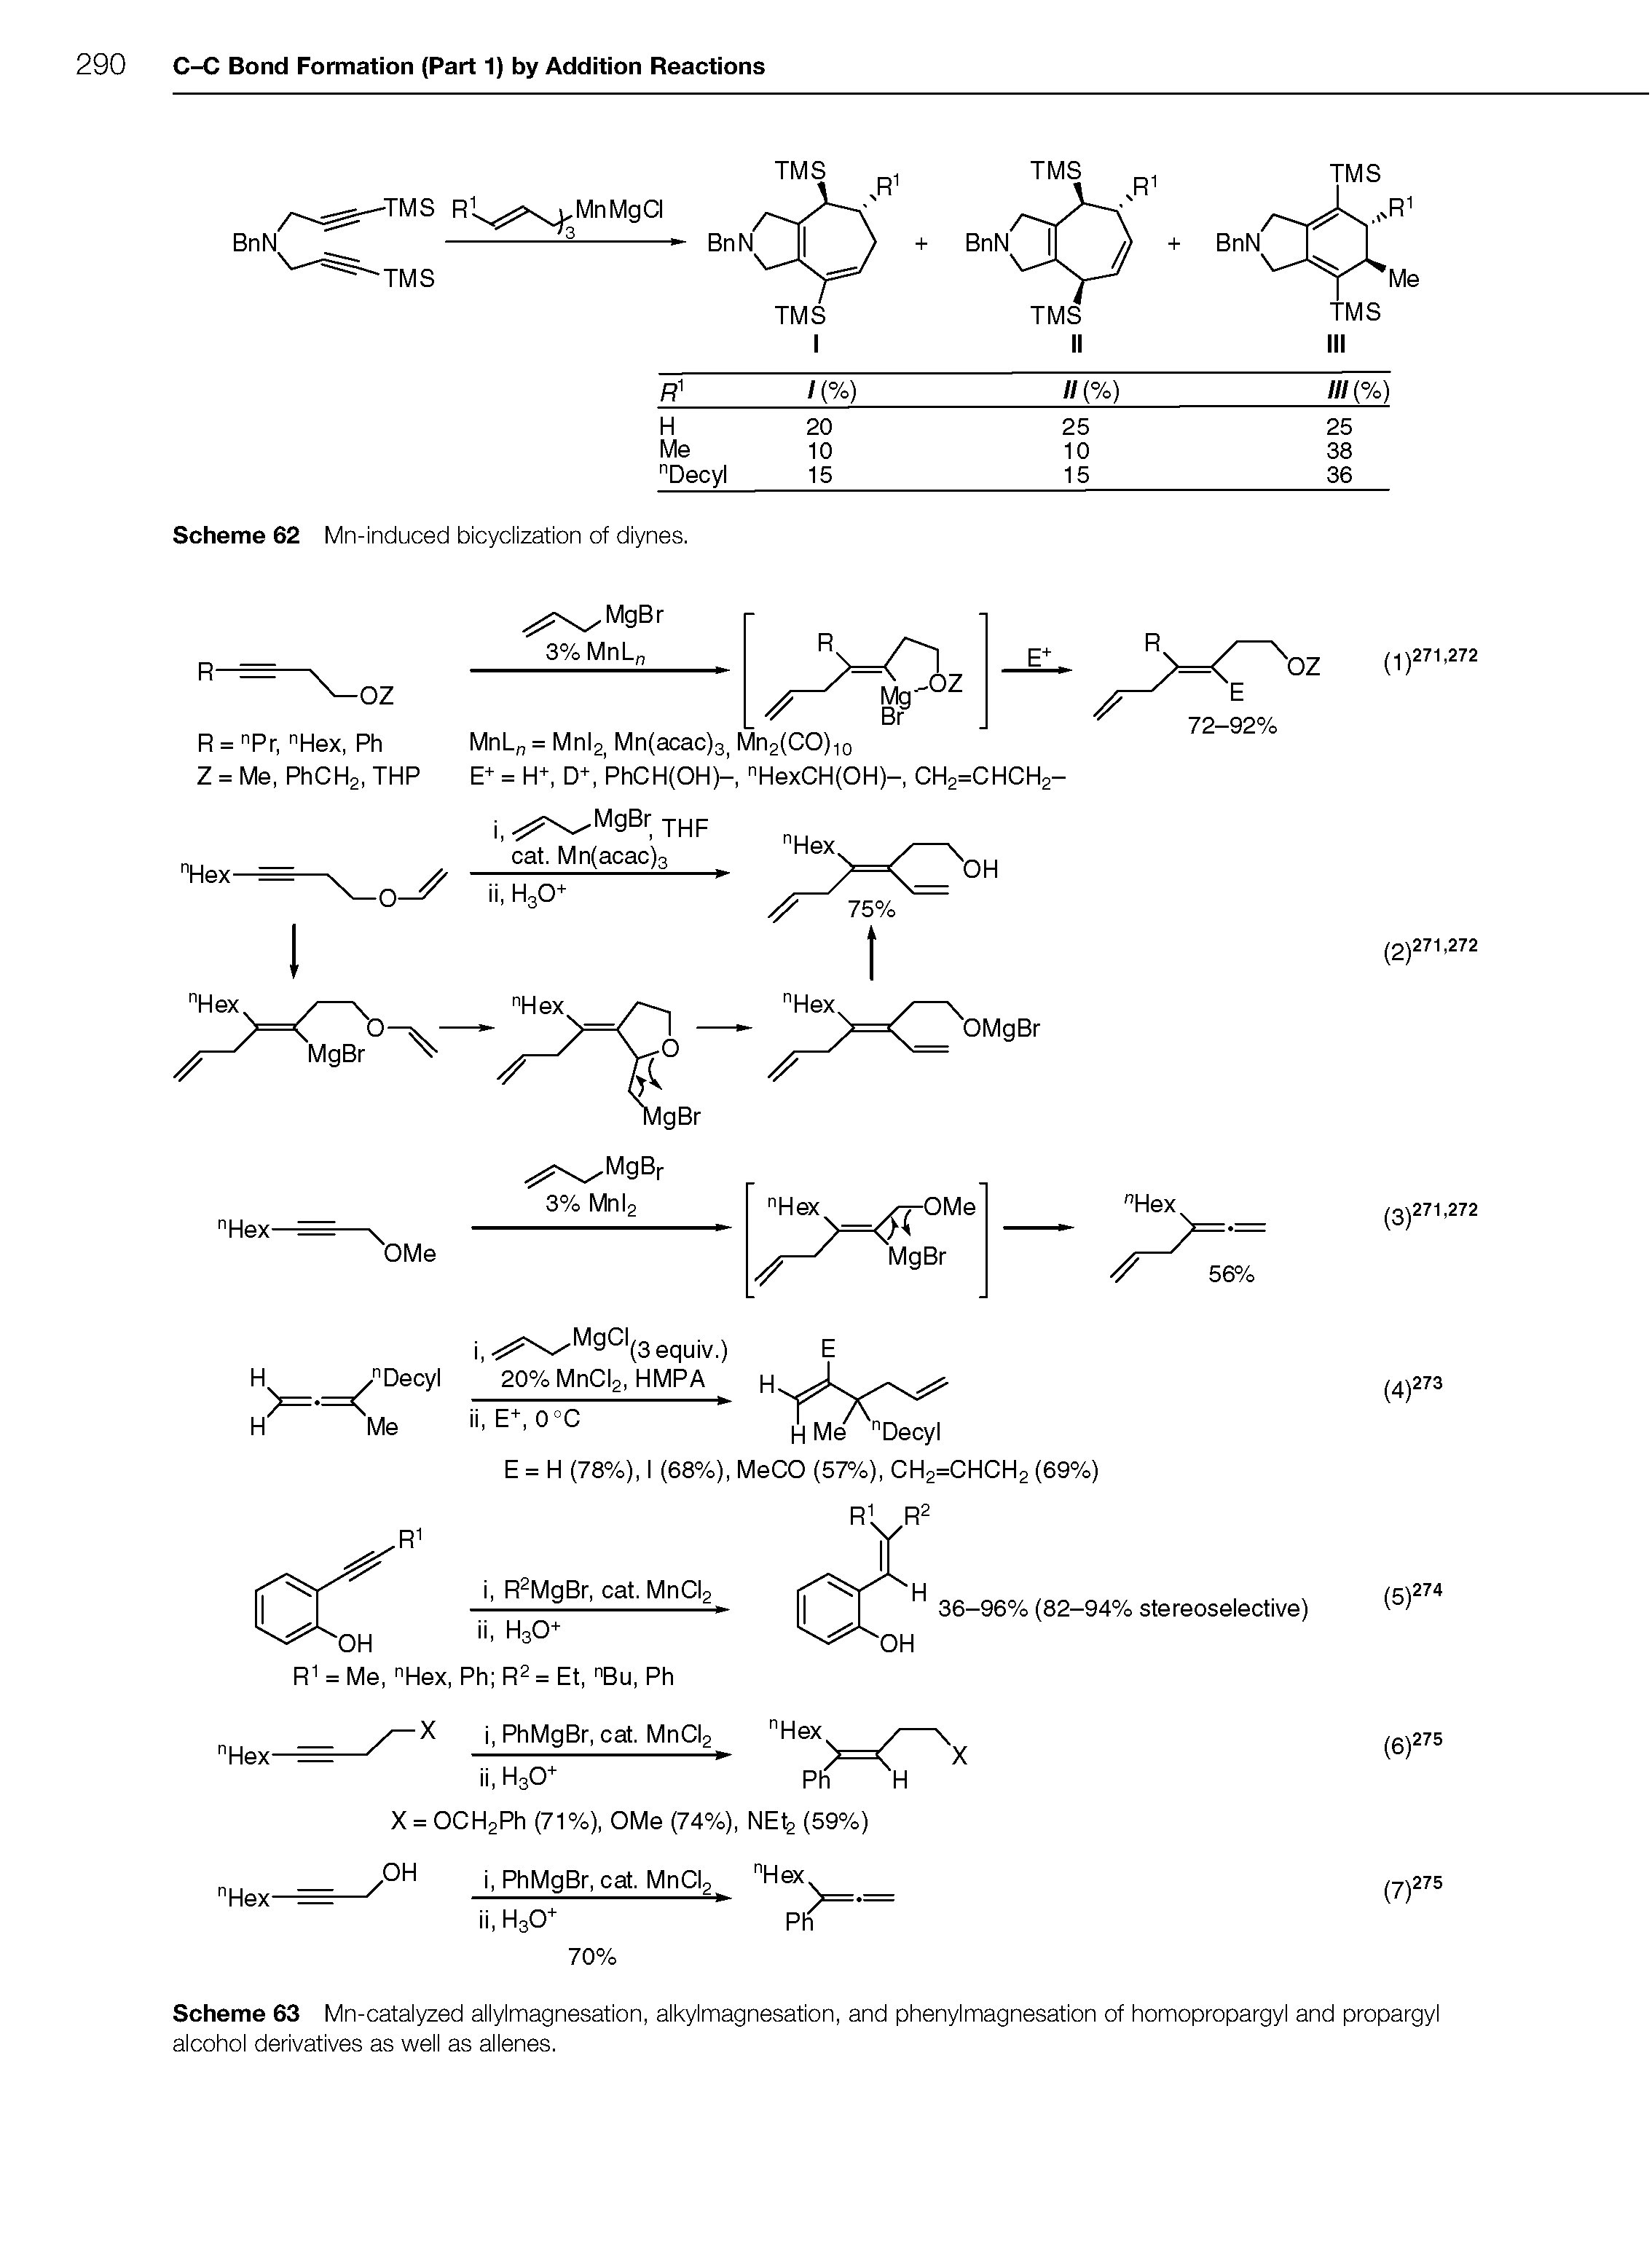 Scheme 63 Mn-catalyzed allylmagnesation, alkylmagnesation, and phenylmagnesation of homopropargyl and propargyl alcohol derivatives as well as allenes.